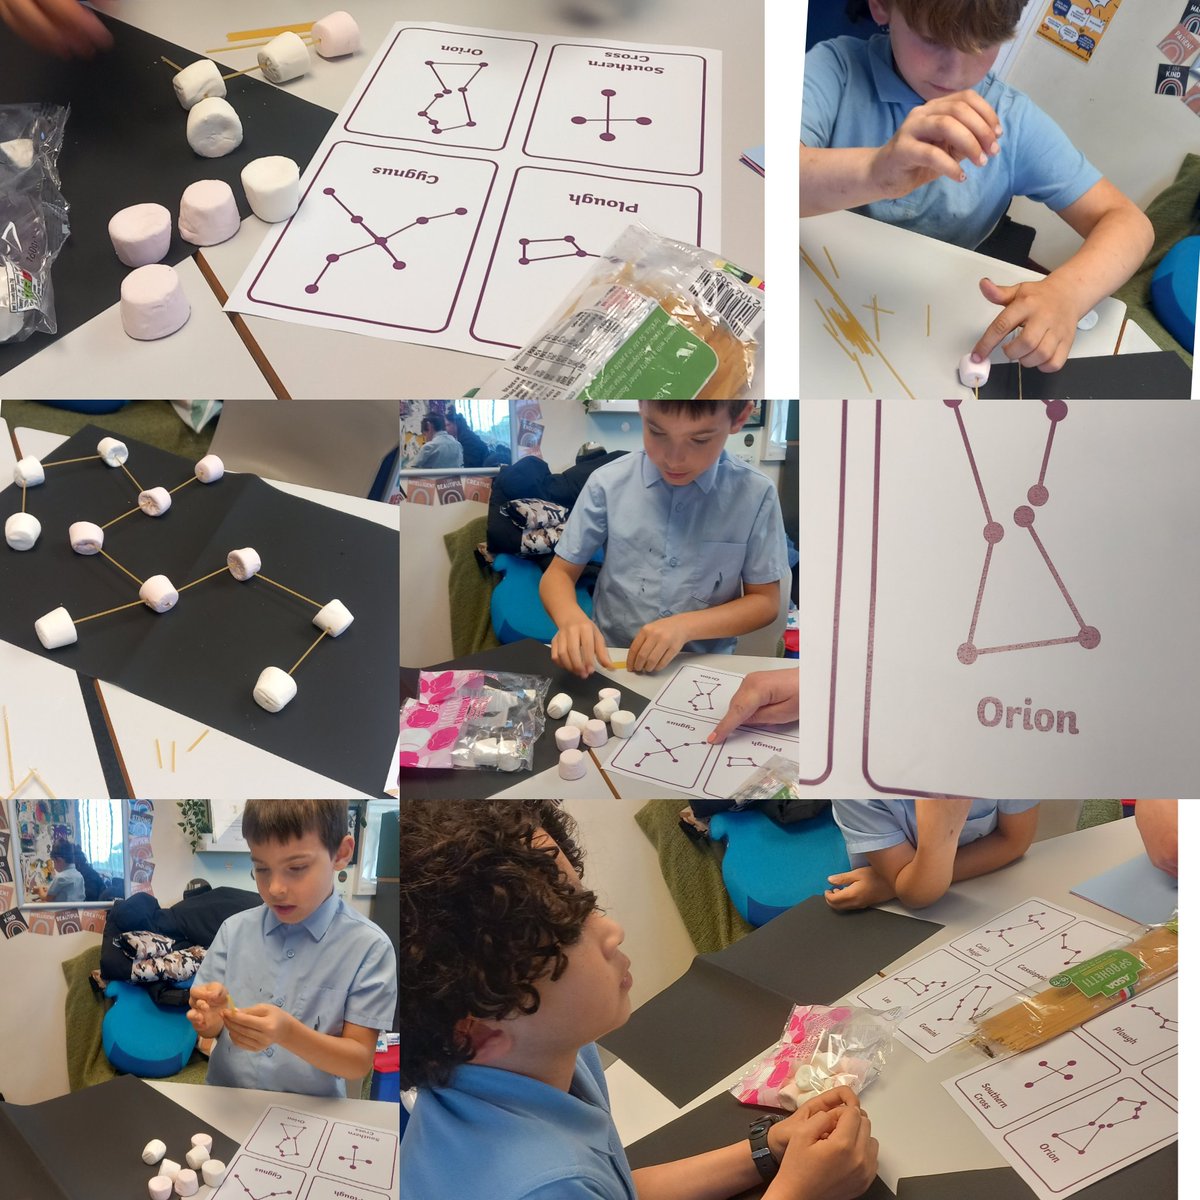 What a great intervention session with @int3rv4nti0ns 
The children created space structures using marshmallows and pasta sticks.A great deal of concentration and resilience was shown throughout our session #ThisisAP #SpaceTopic ☄️🚀👨‍🚀👾🌌🛰